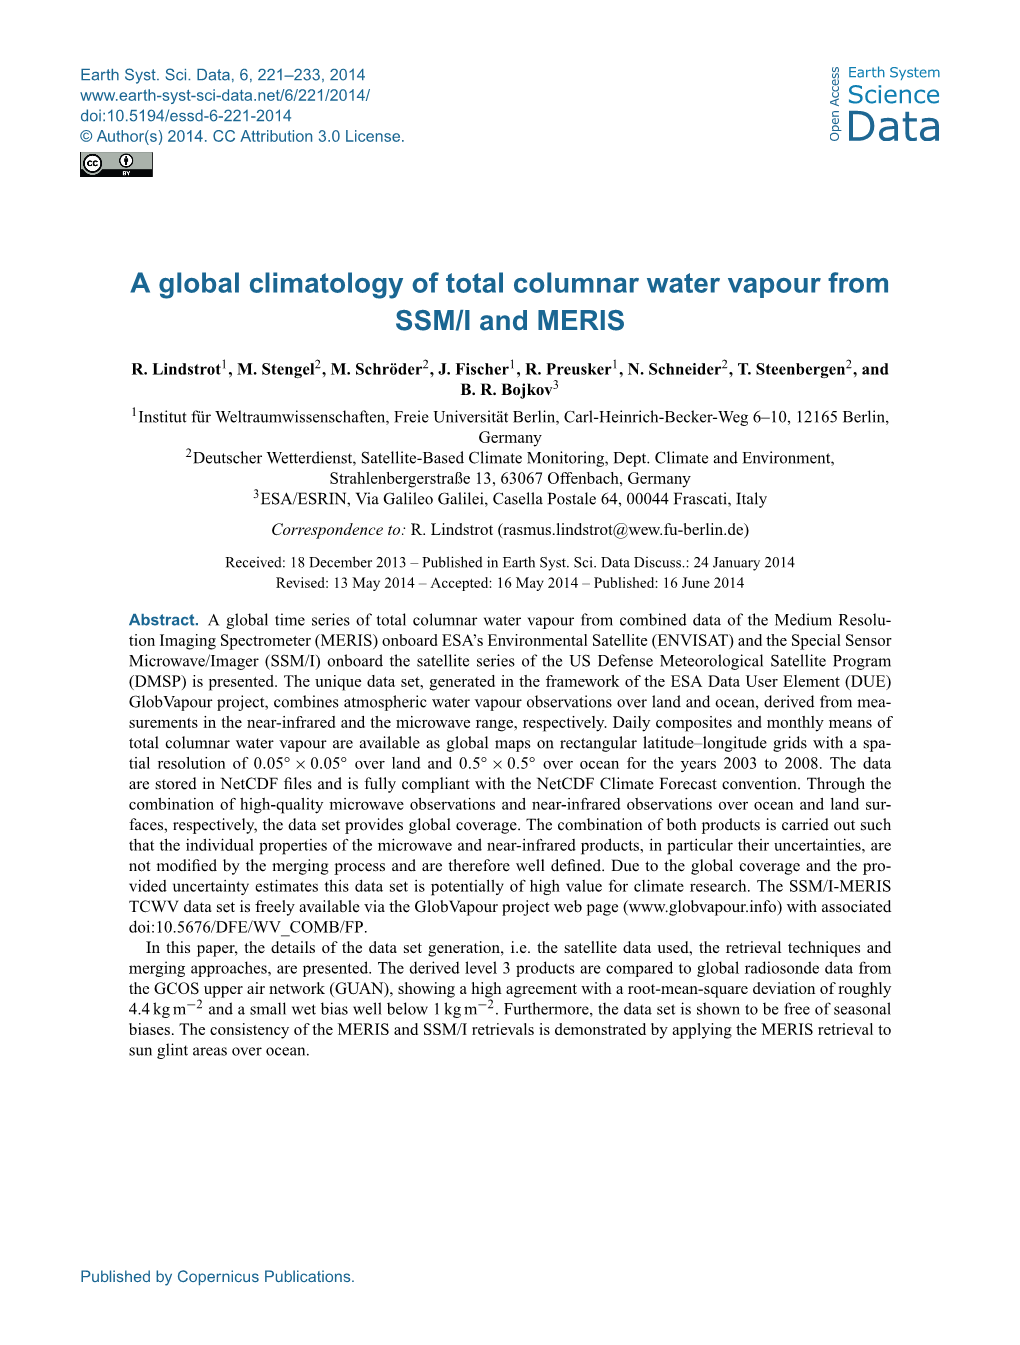 A Global Climatology of Total Columnar Water Vapour from SSM/I and MERIS